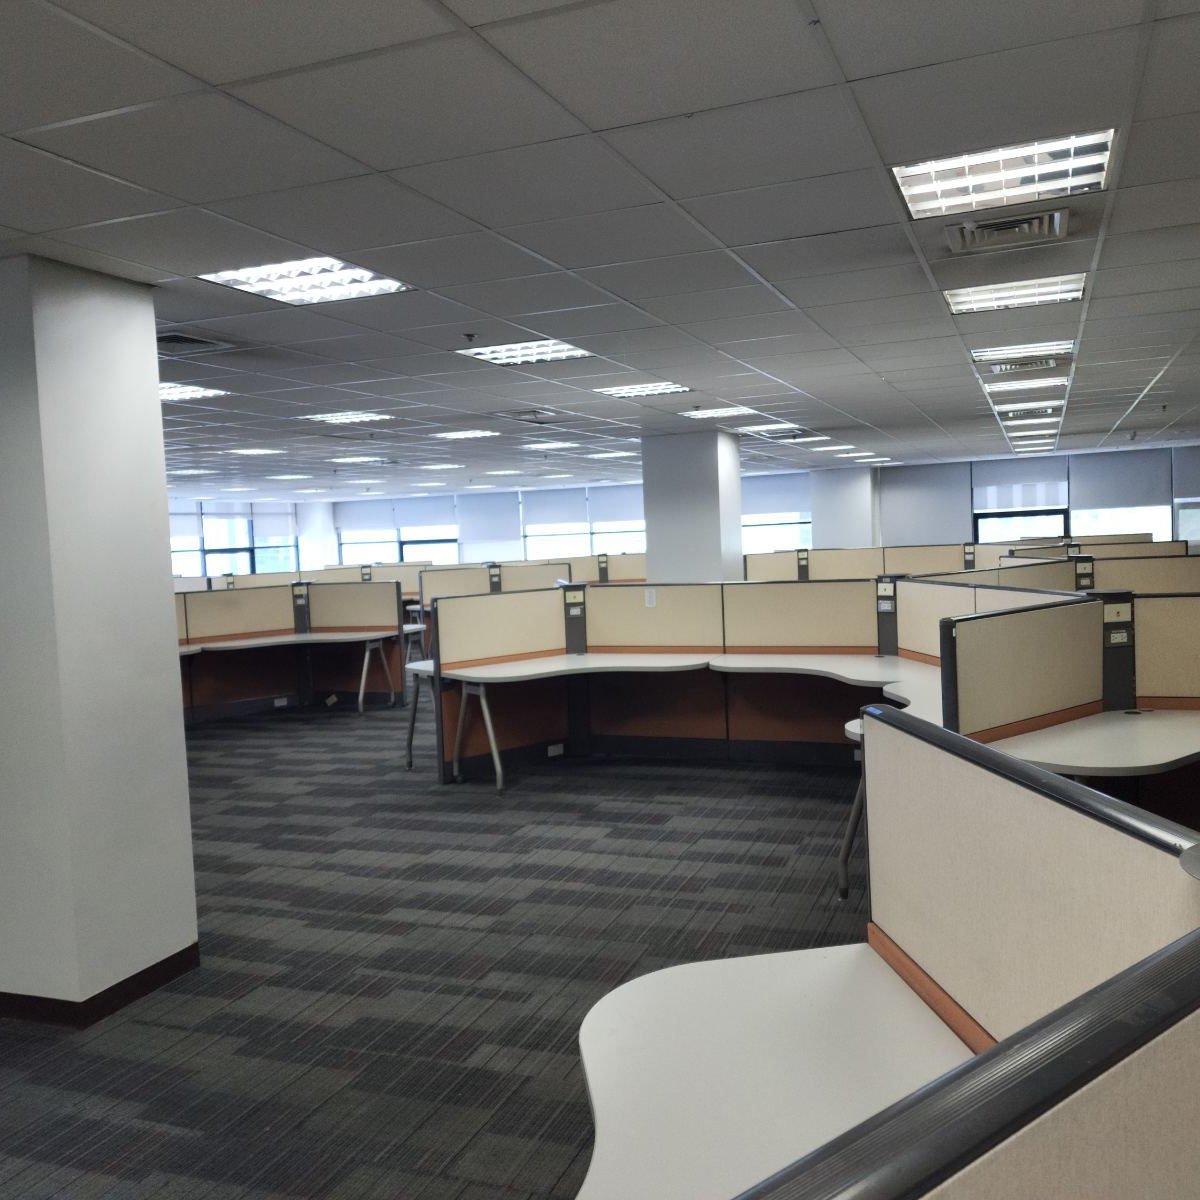 1000 sqm Fitted Office Space Lease Rent Alabang Muntinlupa